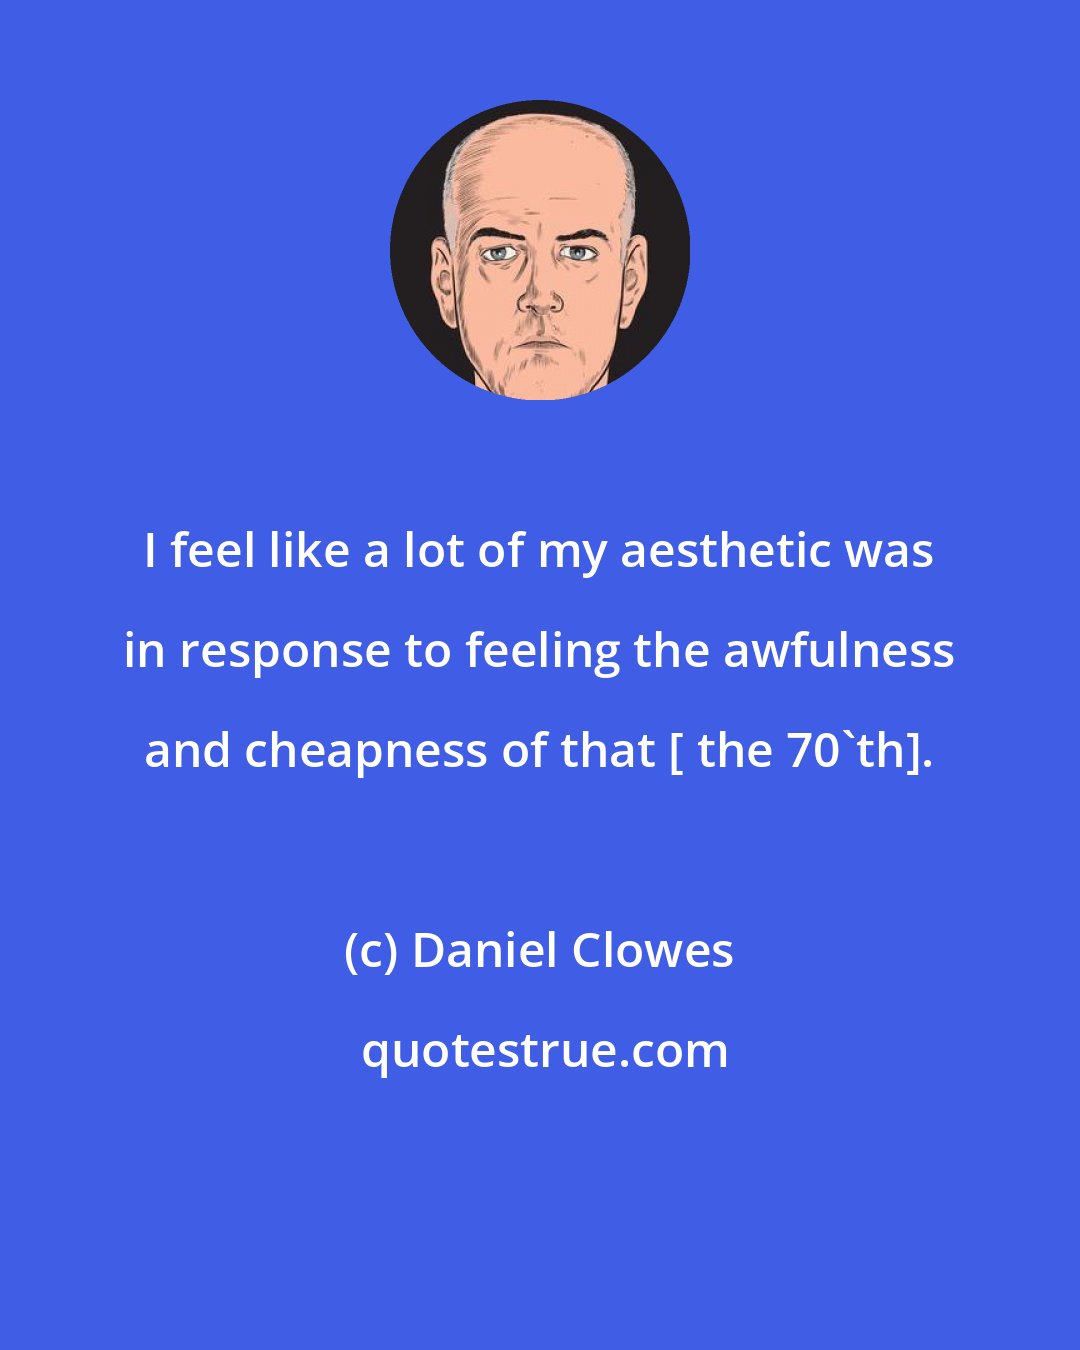 Daniel Clowes: I feel like a lot of my aesthetic was in response to feeling the awfulness and cheapness of that [ the 70'th].